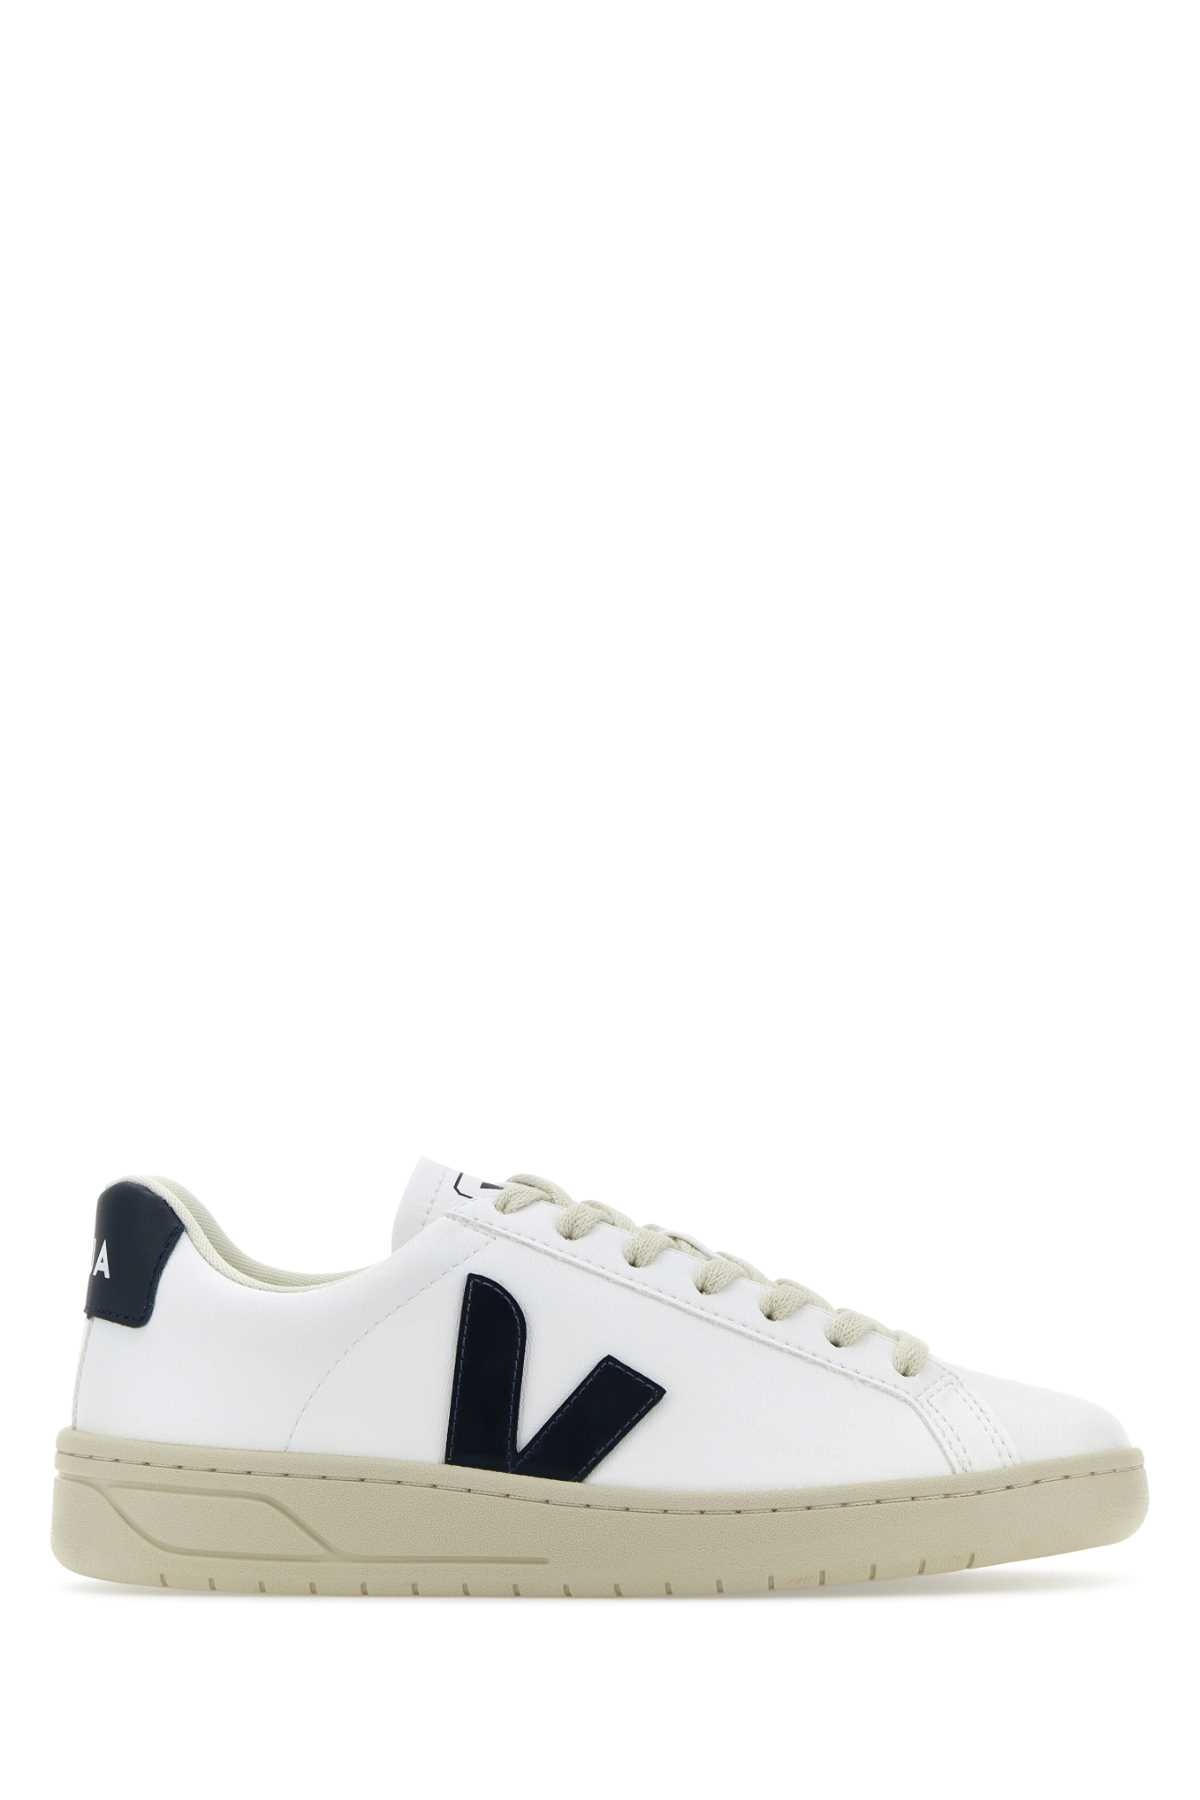 Shop Veja White Synthetic Leather Urca Sneakers In Whitenautico